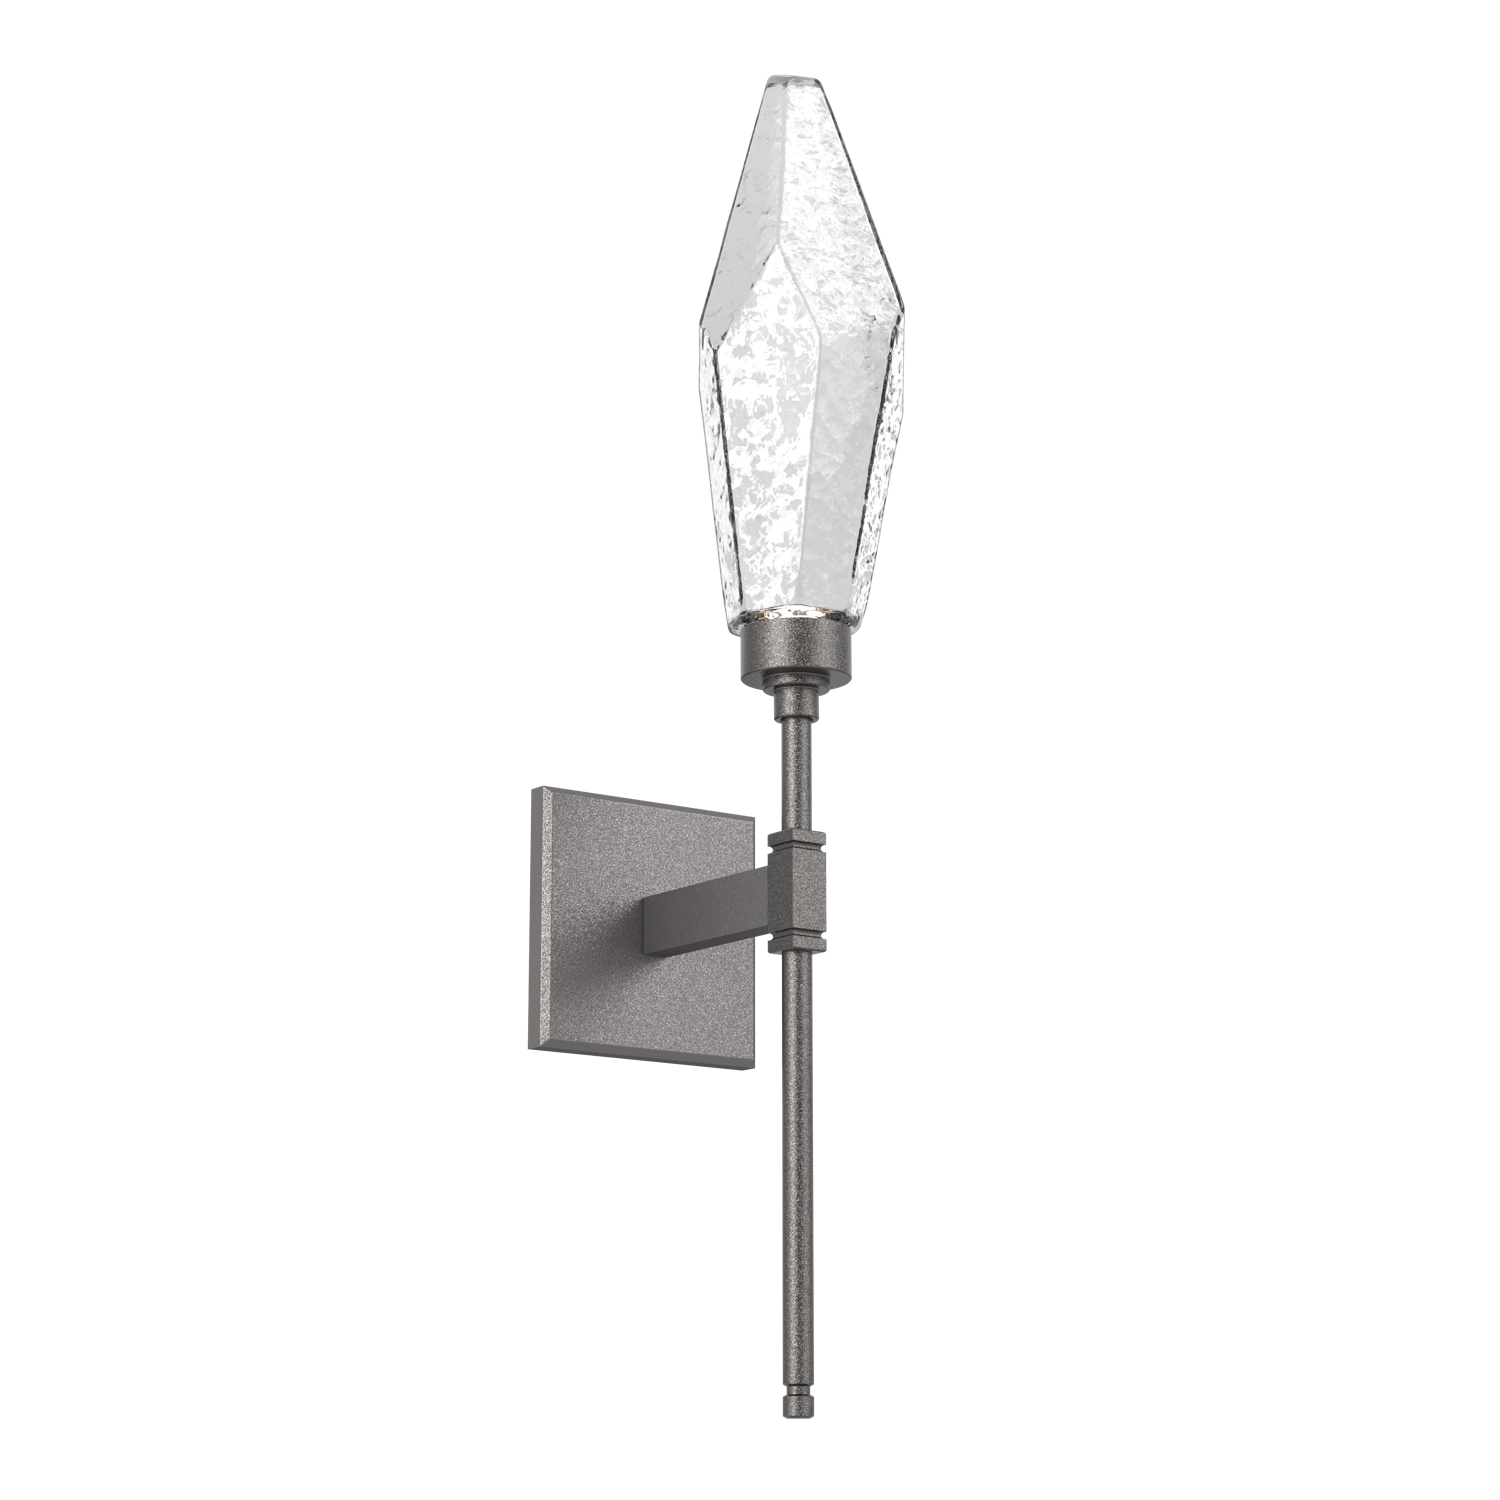 IDB0050-07-GP-CC-Hammerton-Studio-Rock-Crystal-belvedere-wall-sconce-with-graphite-finish-and-clear-glass-shades-and-LED-lamping